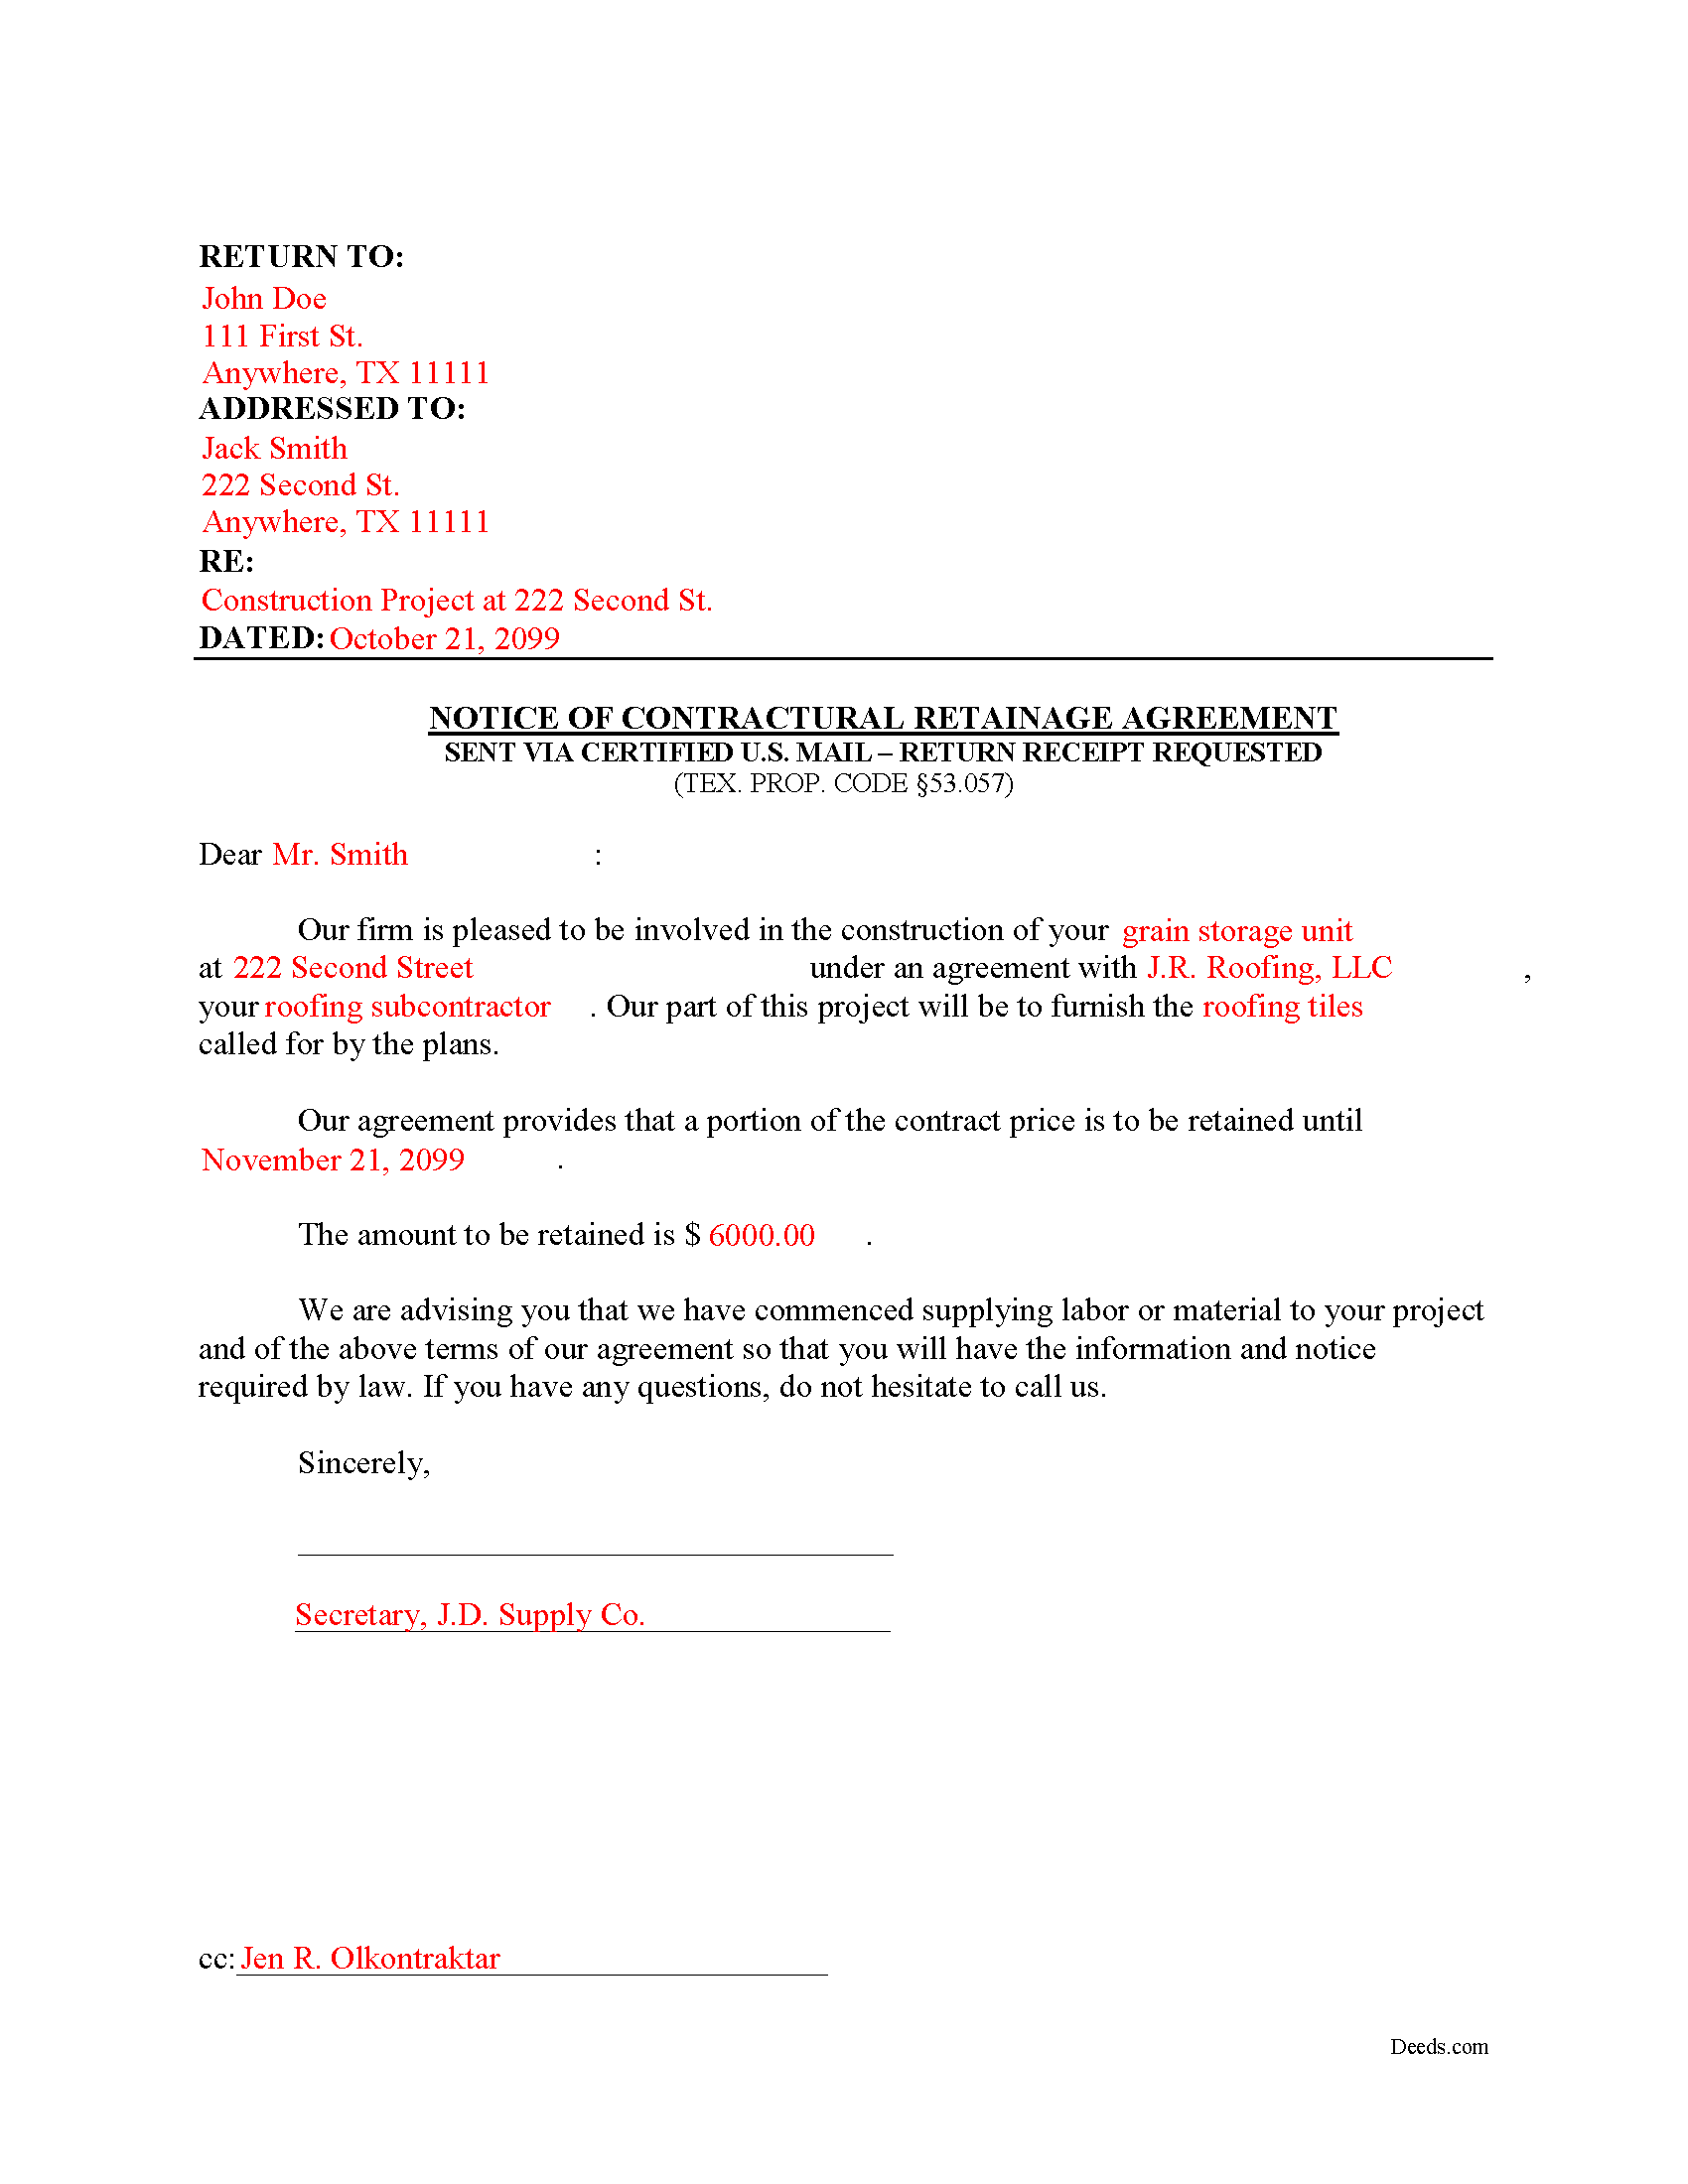 Completed Example of the Notice of Contractual Retainage Document